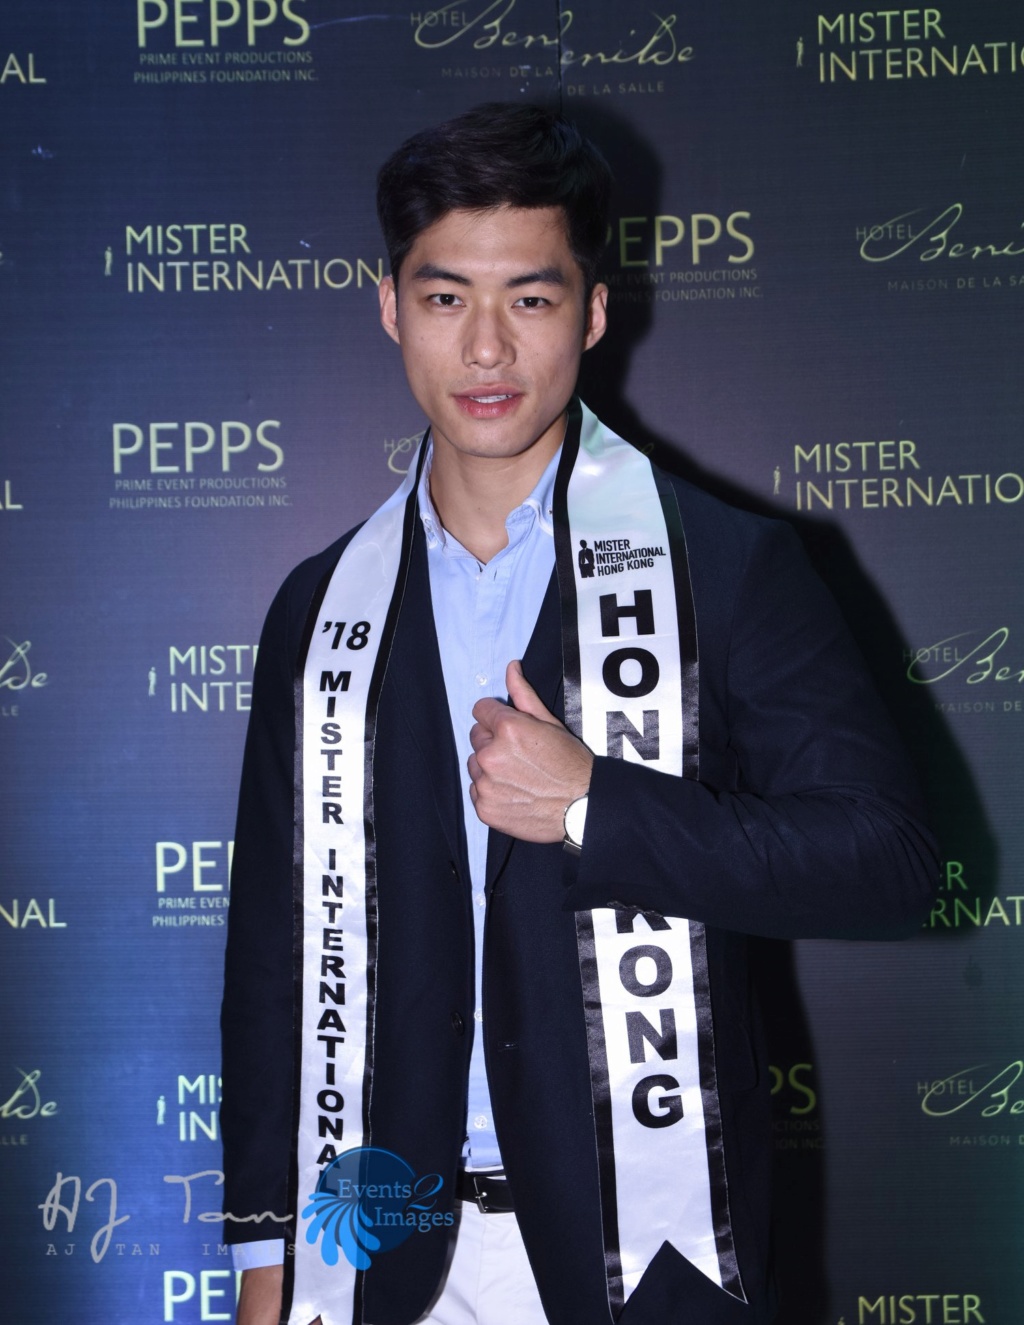 The 13th Mister International in Manila, Philippines on February 24,2019 - Page 7 52303911